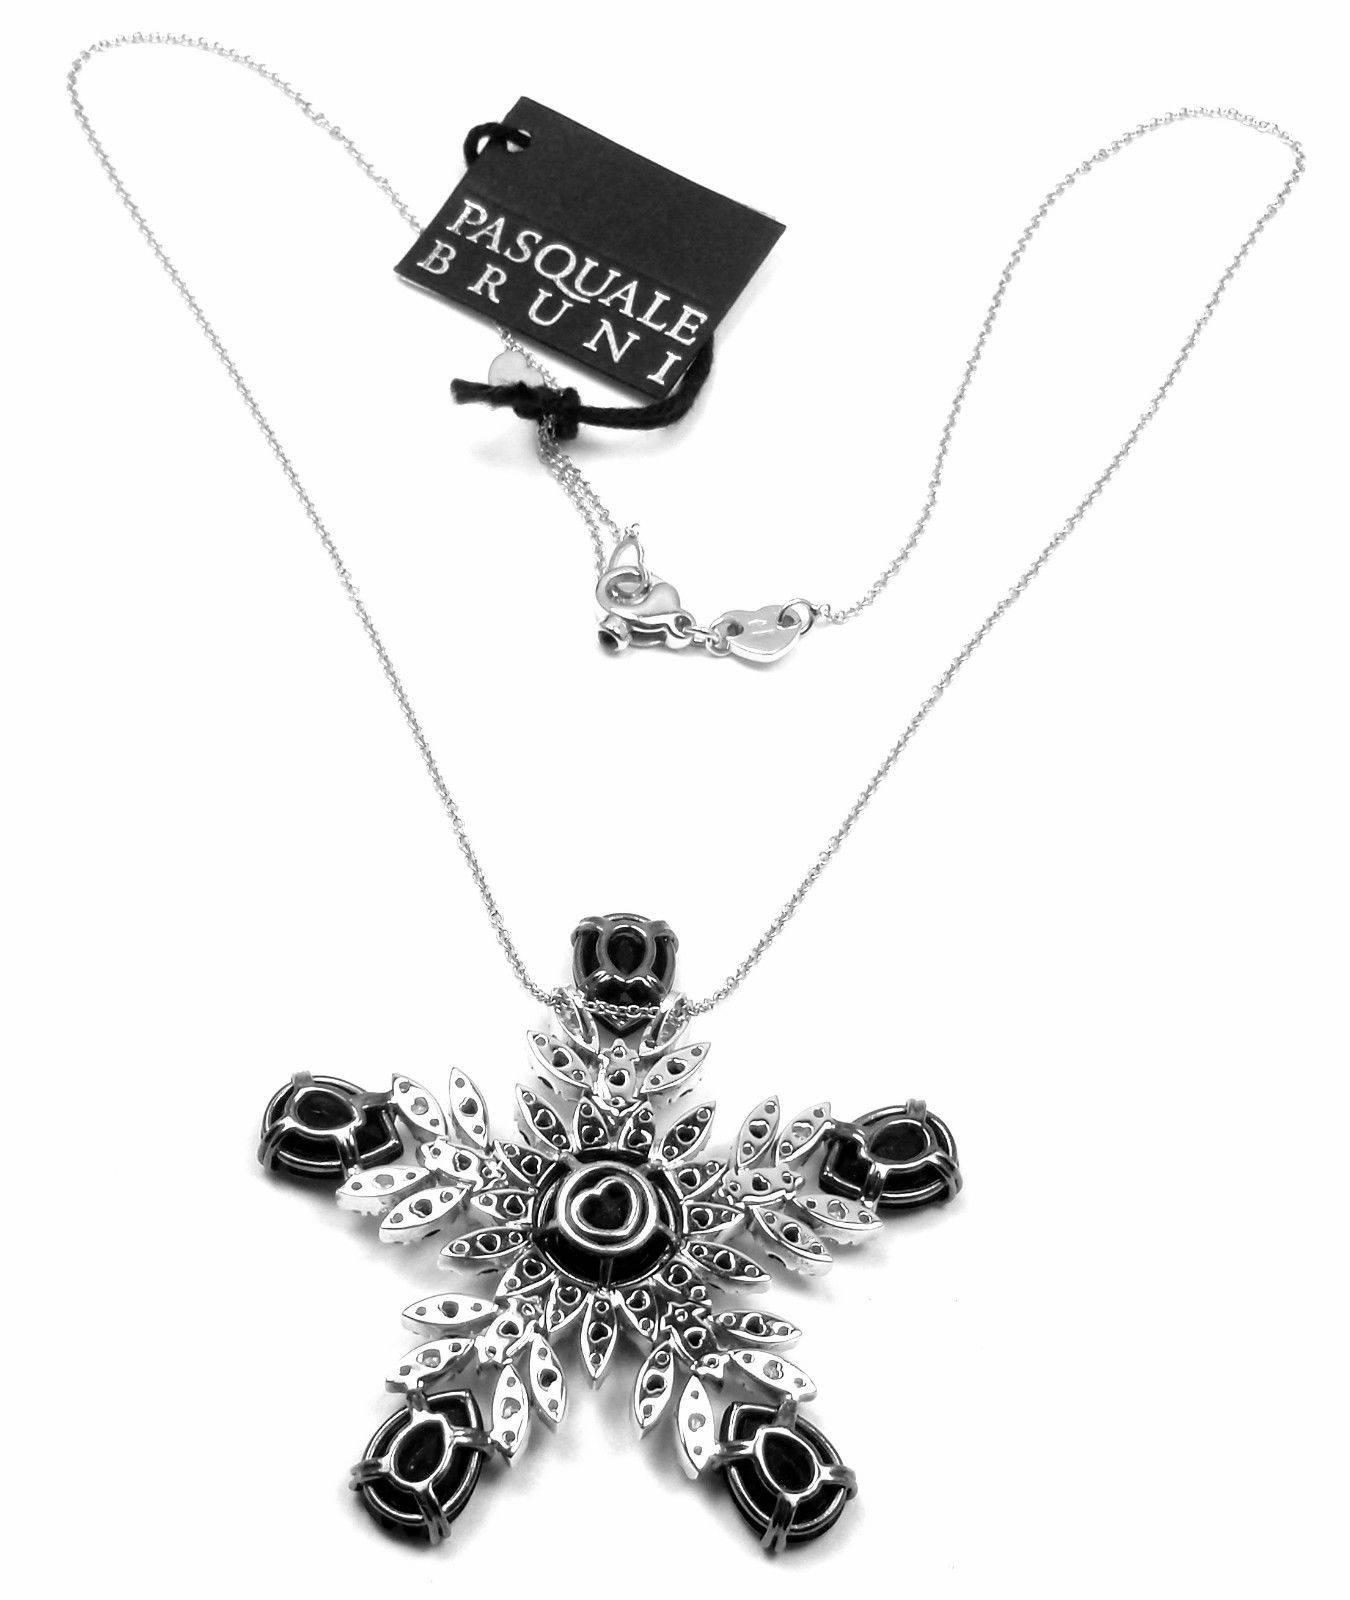 18k White Gold Large 70Queen Diamond And Black Agate Pendant Necklace
by Pasquale Bruni.
With Round brilliant cut diamonds VS2 clarity, E color total weight approx. 1.45ct
Black Agate stones total weight approx. 8ct
This necklace comes with Box,